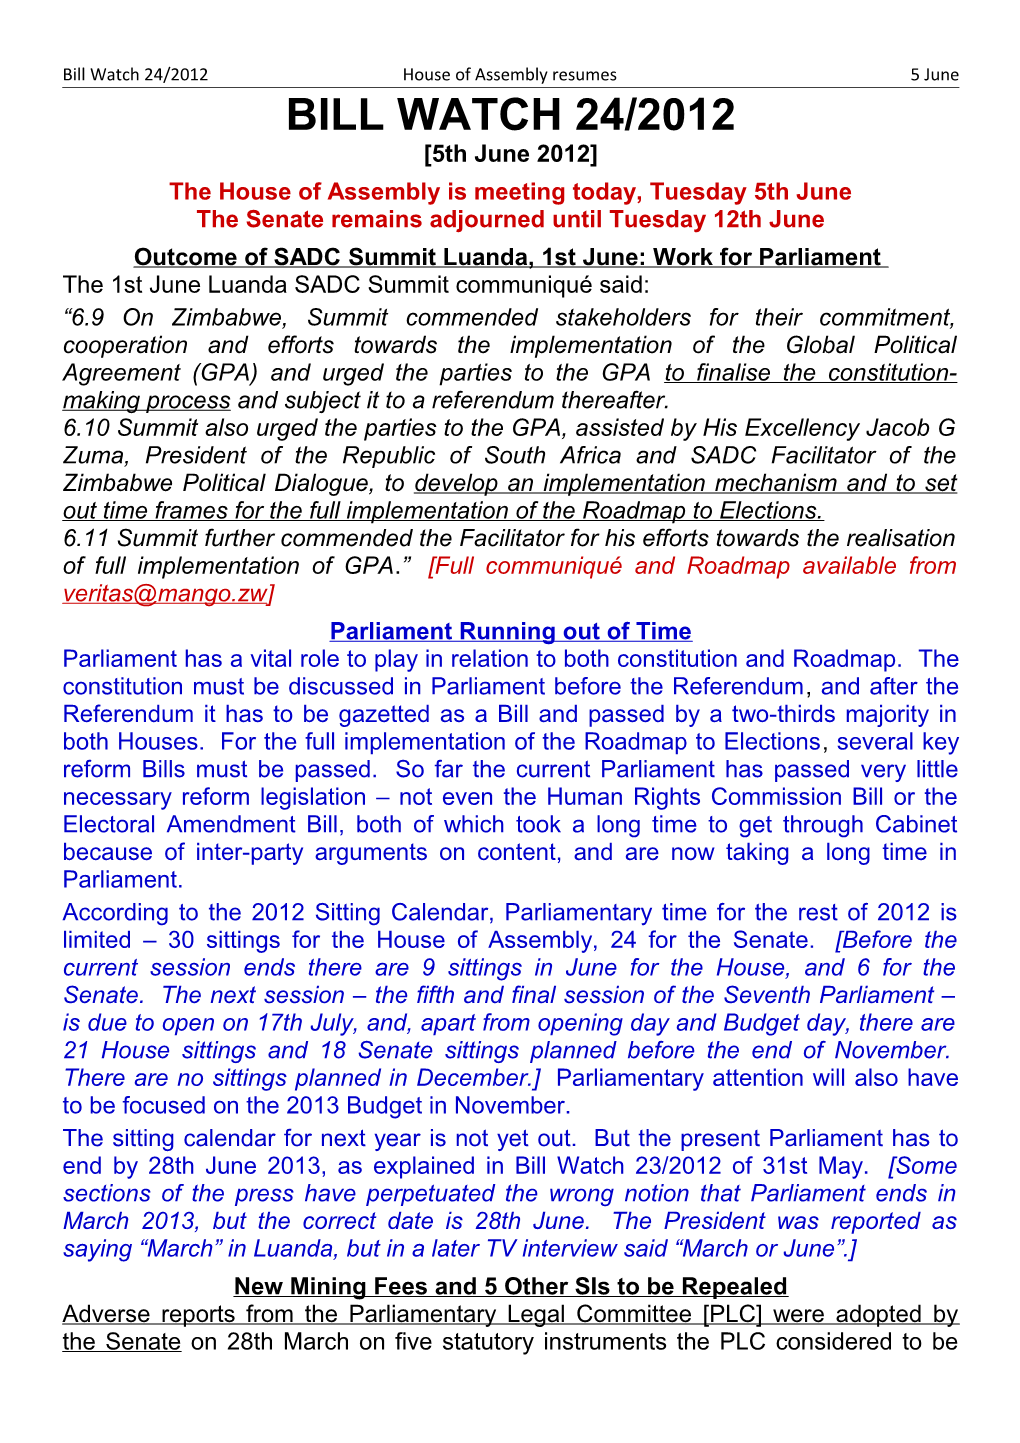 The House of Assembly Is Meeting Today, Tuesday 5Th June